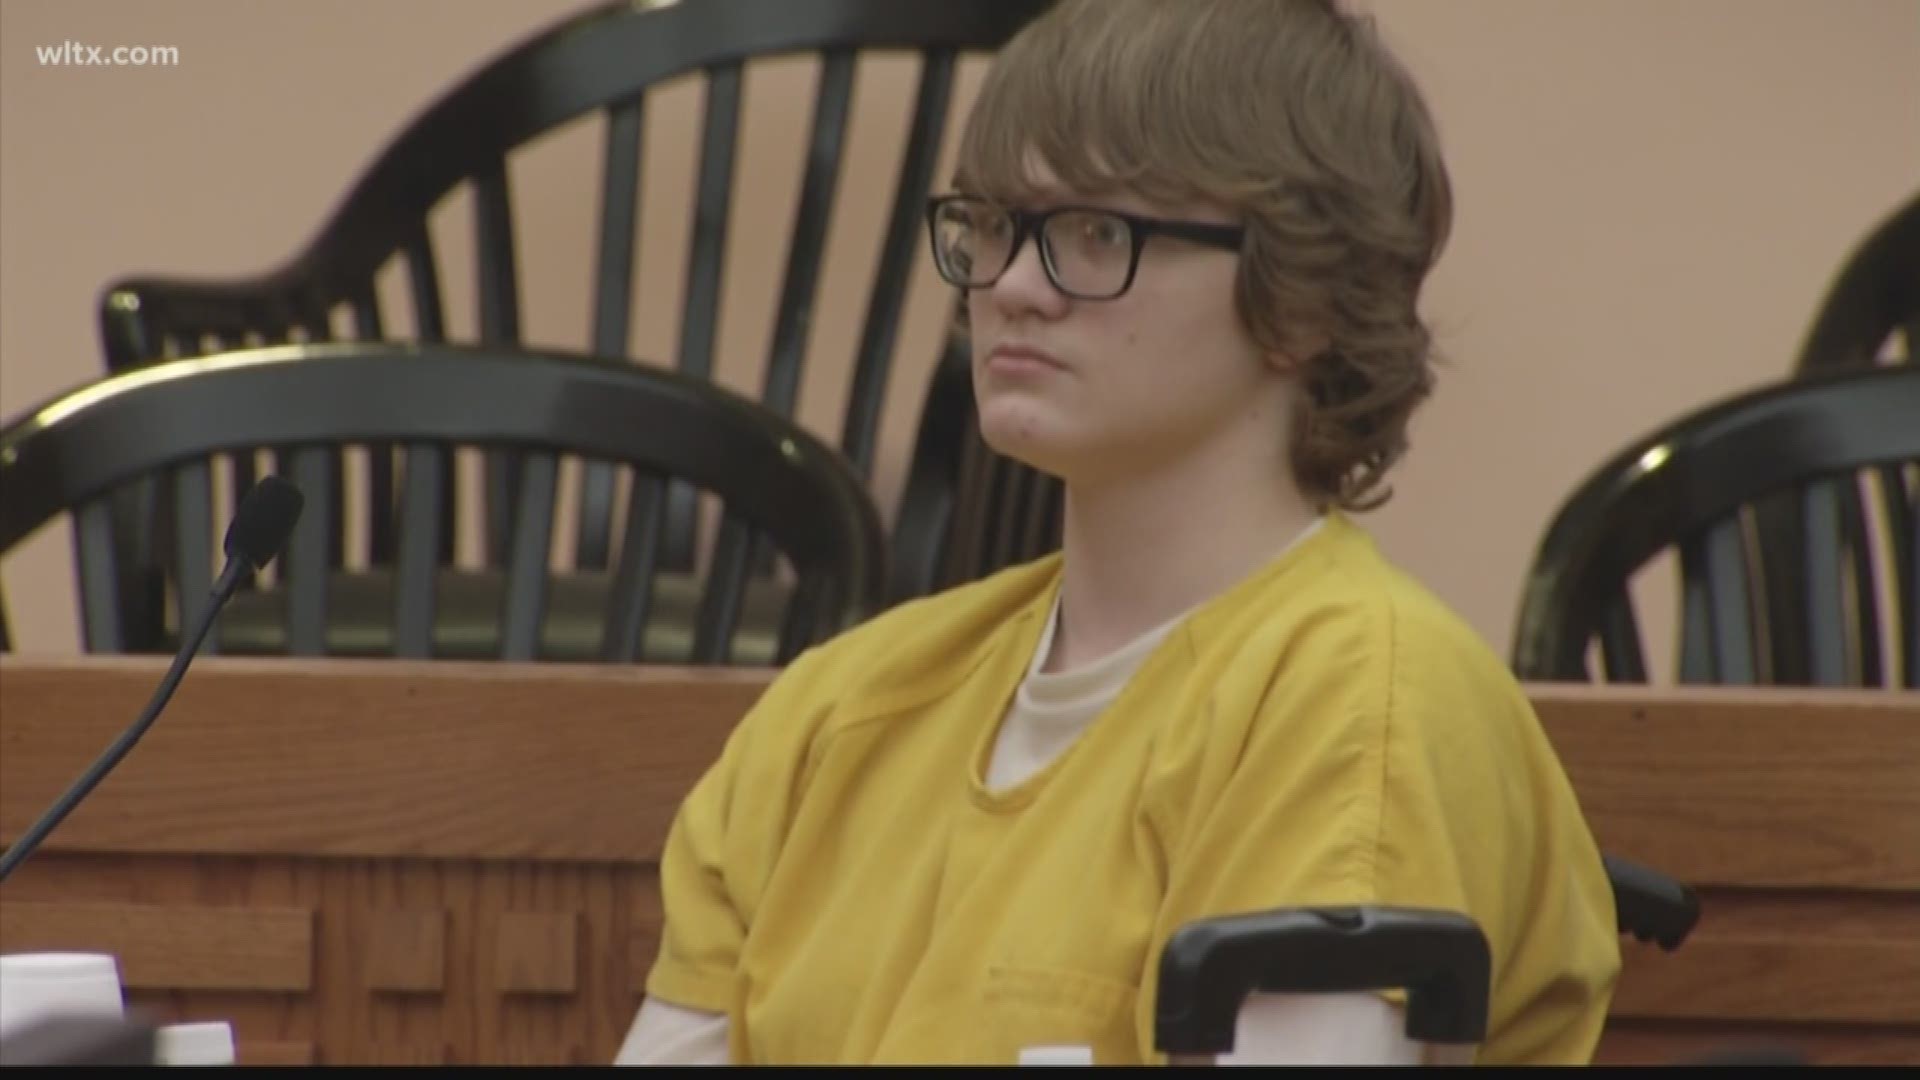 Jesse Osborne, the teen accused in the Townville Elementary School shooting of 2016, is expected in court Thursday for an arraignment.